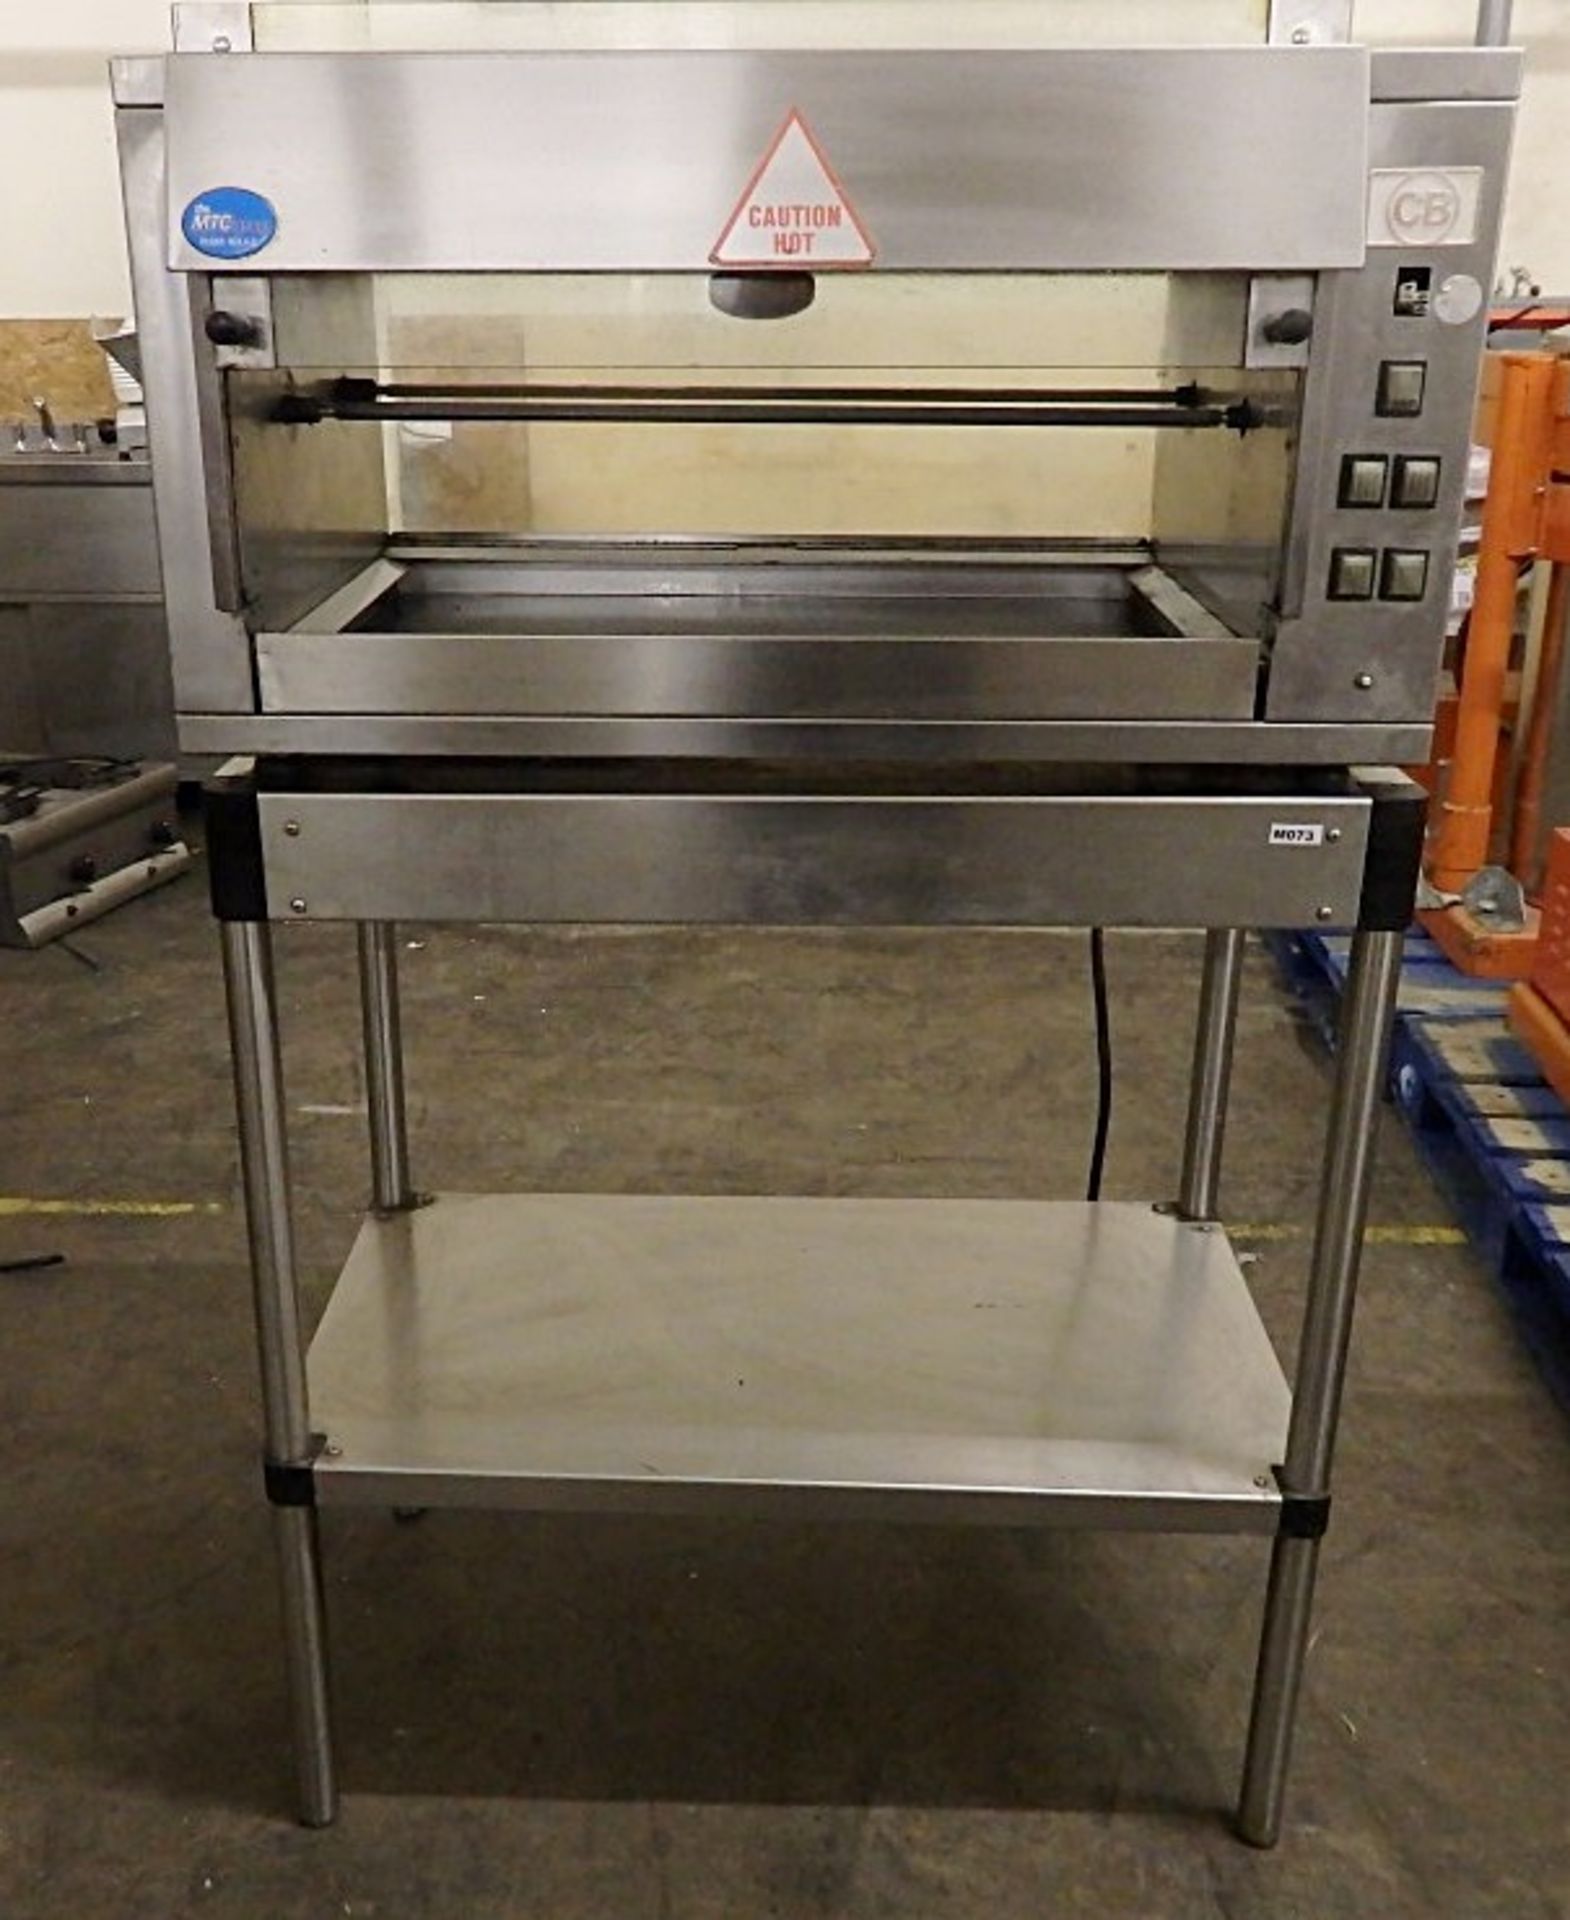 1 x Rotisserie Oven And Stand Reserve - Dimensions; Oven W90 x D56 x H47 (H137 Inc. Stand) Ref: M073 - Image 3 of 6